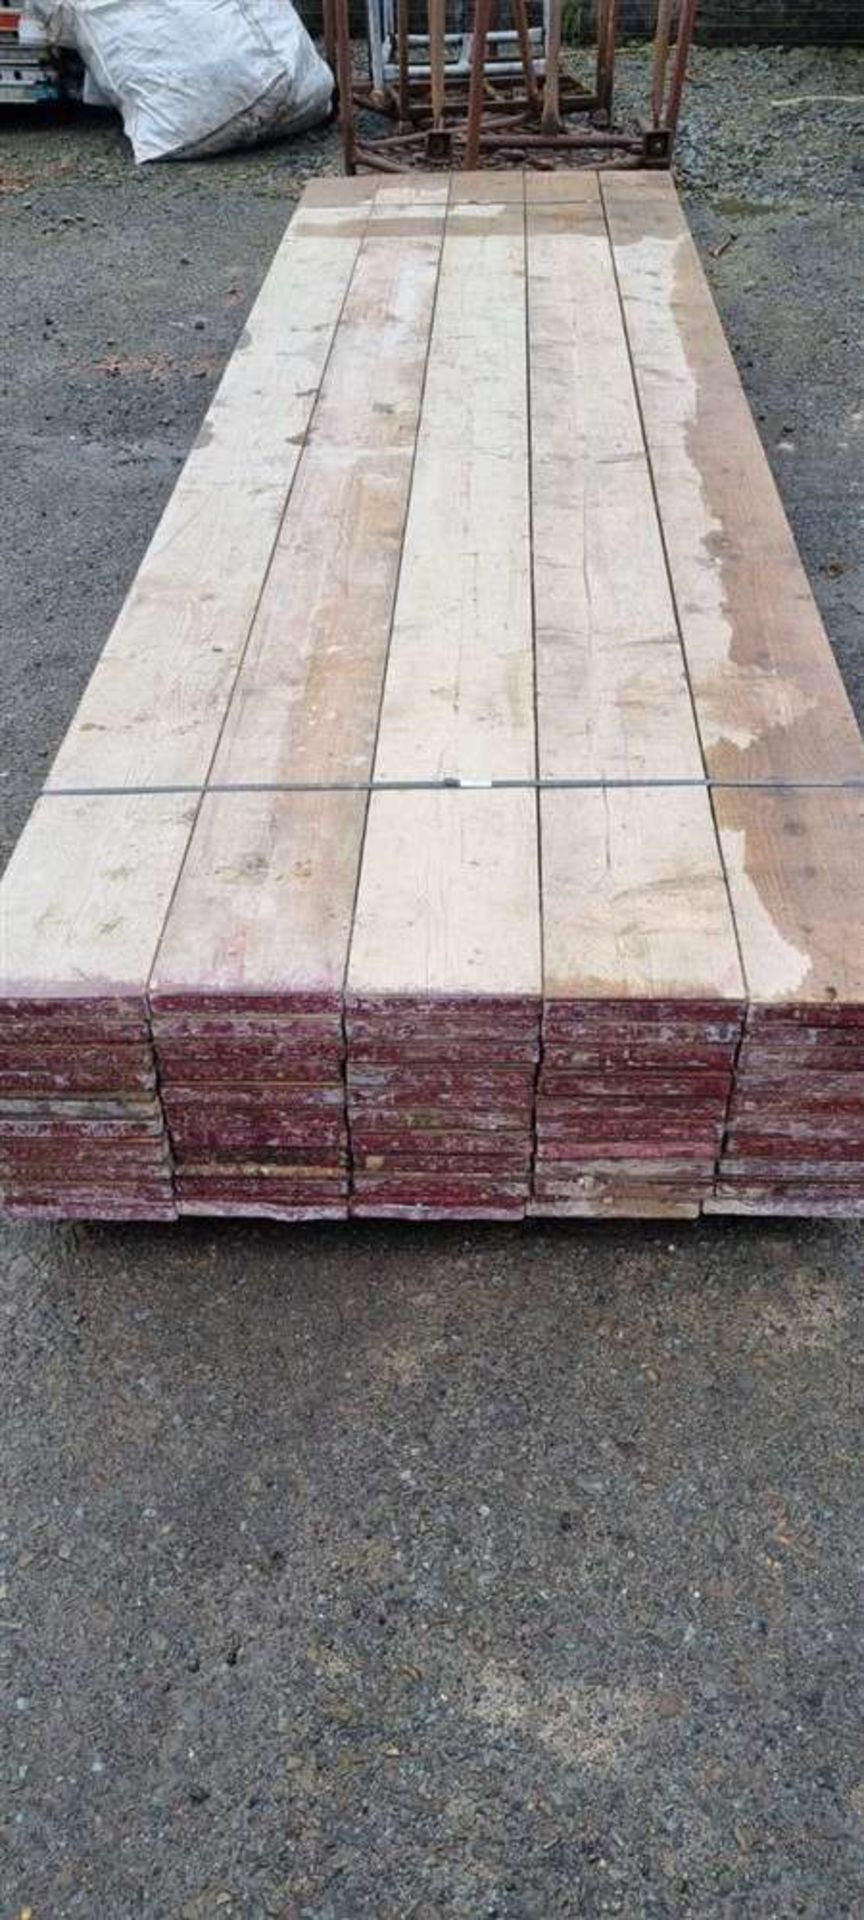 Pack of 50 x 13ft Scaffold Boards (Sold on Site - Burnley) - Image 2 of 2